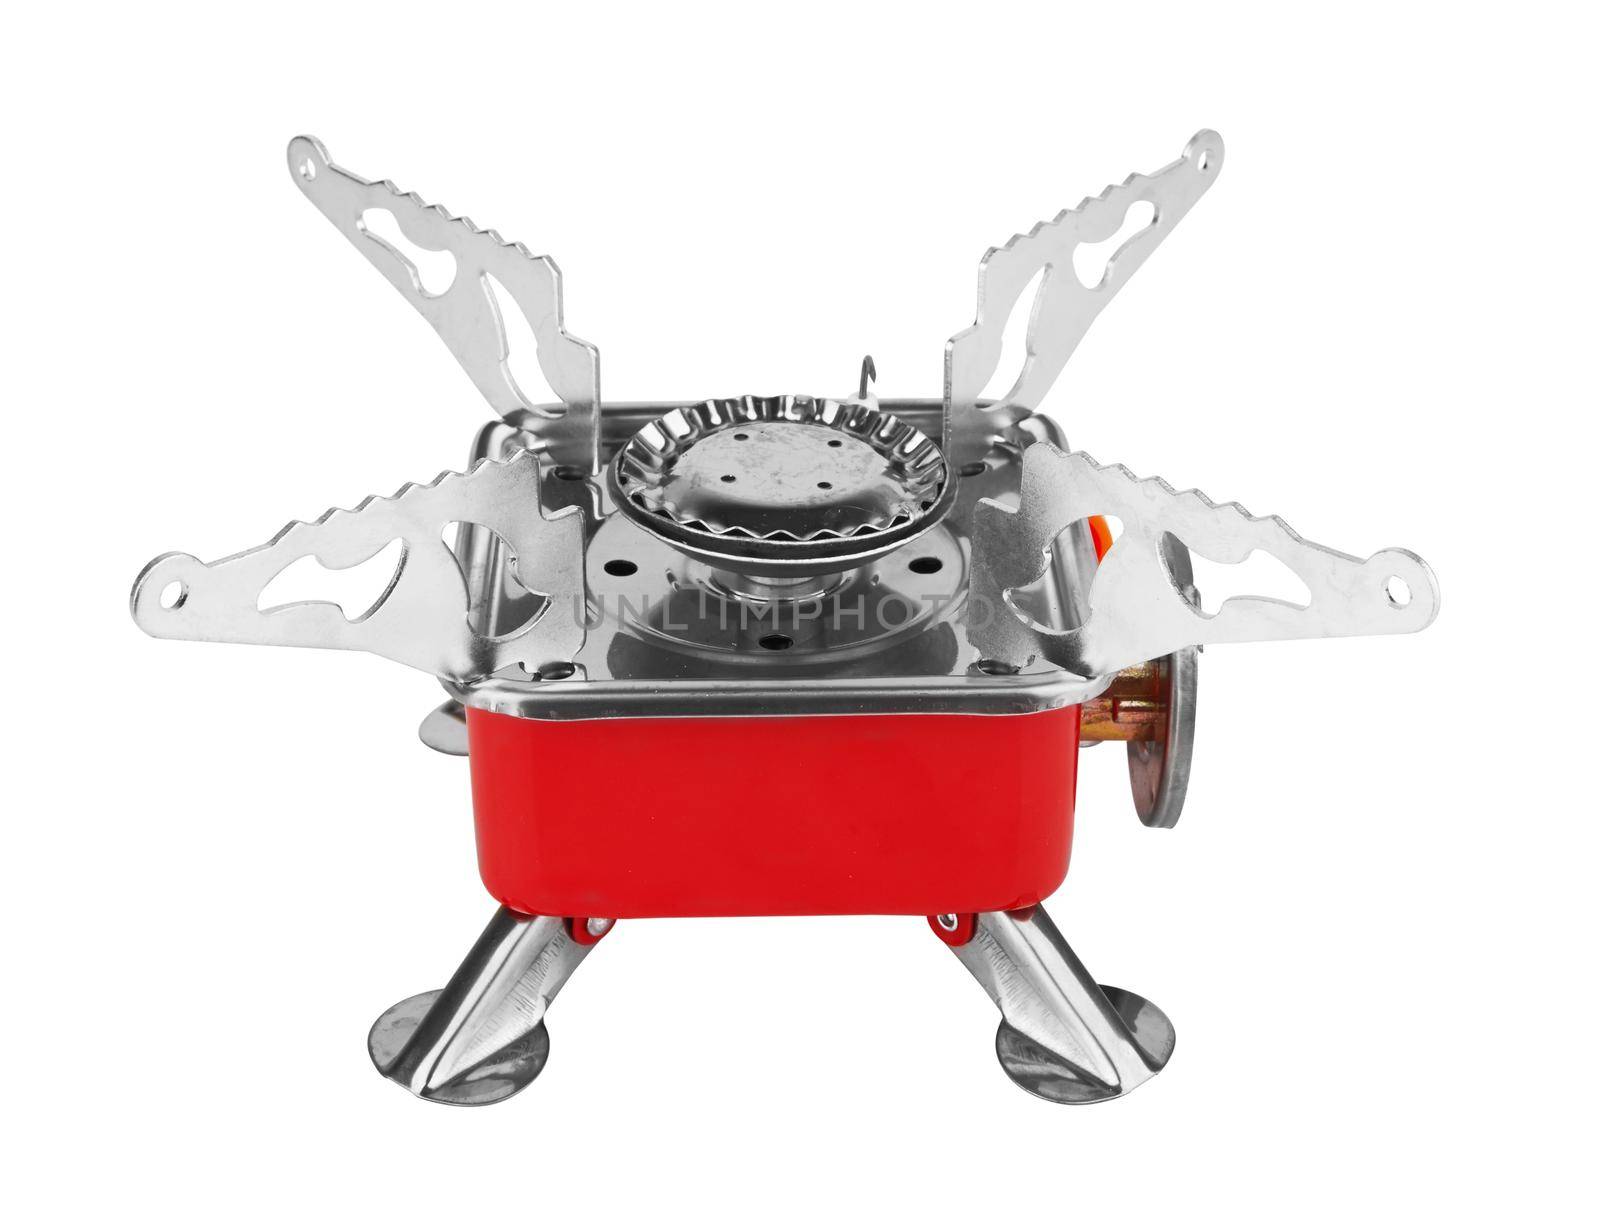 Camping gas stove isolated on a white background